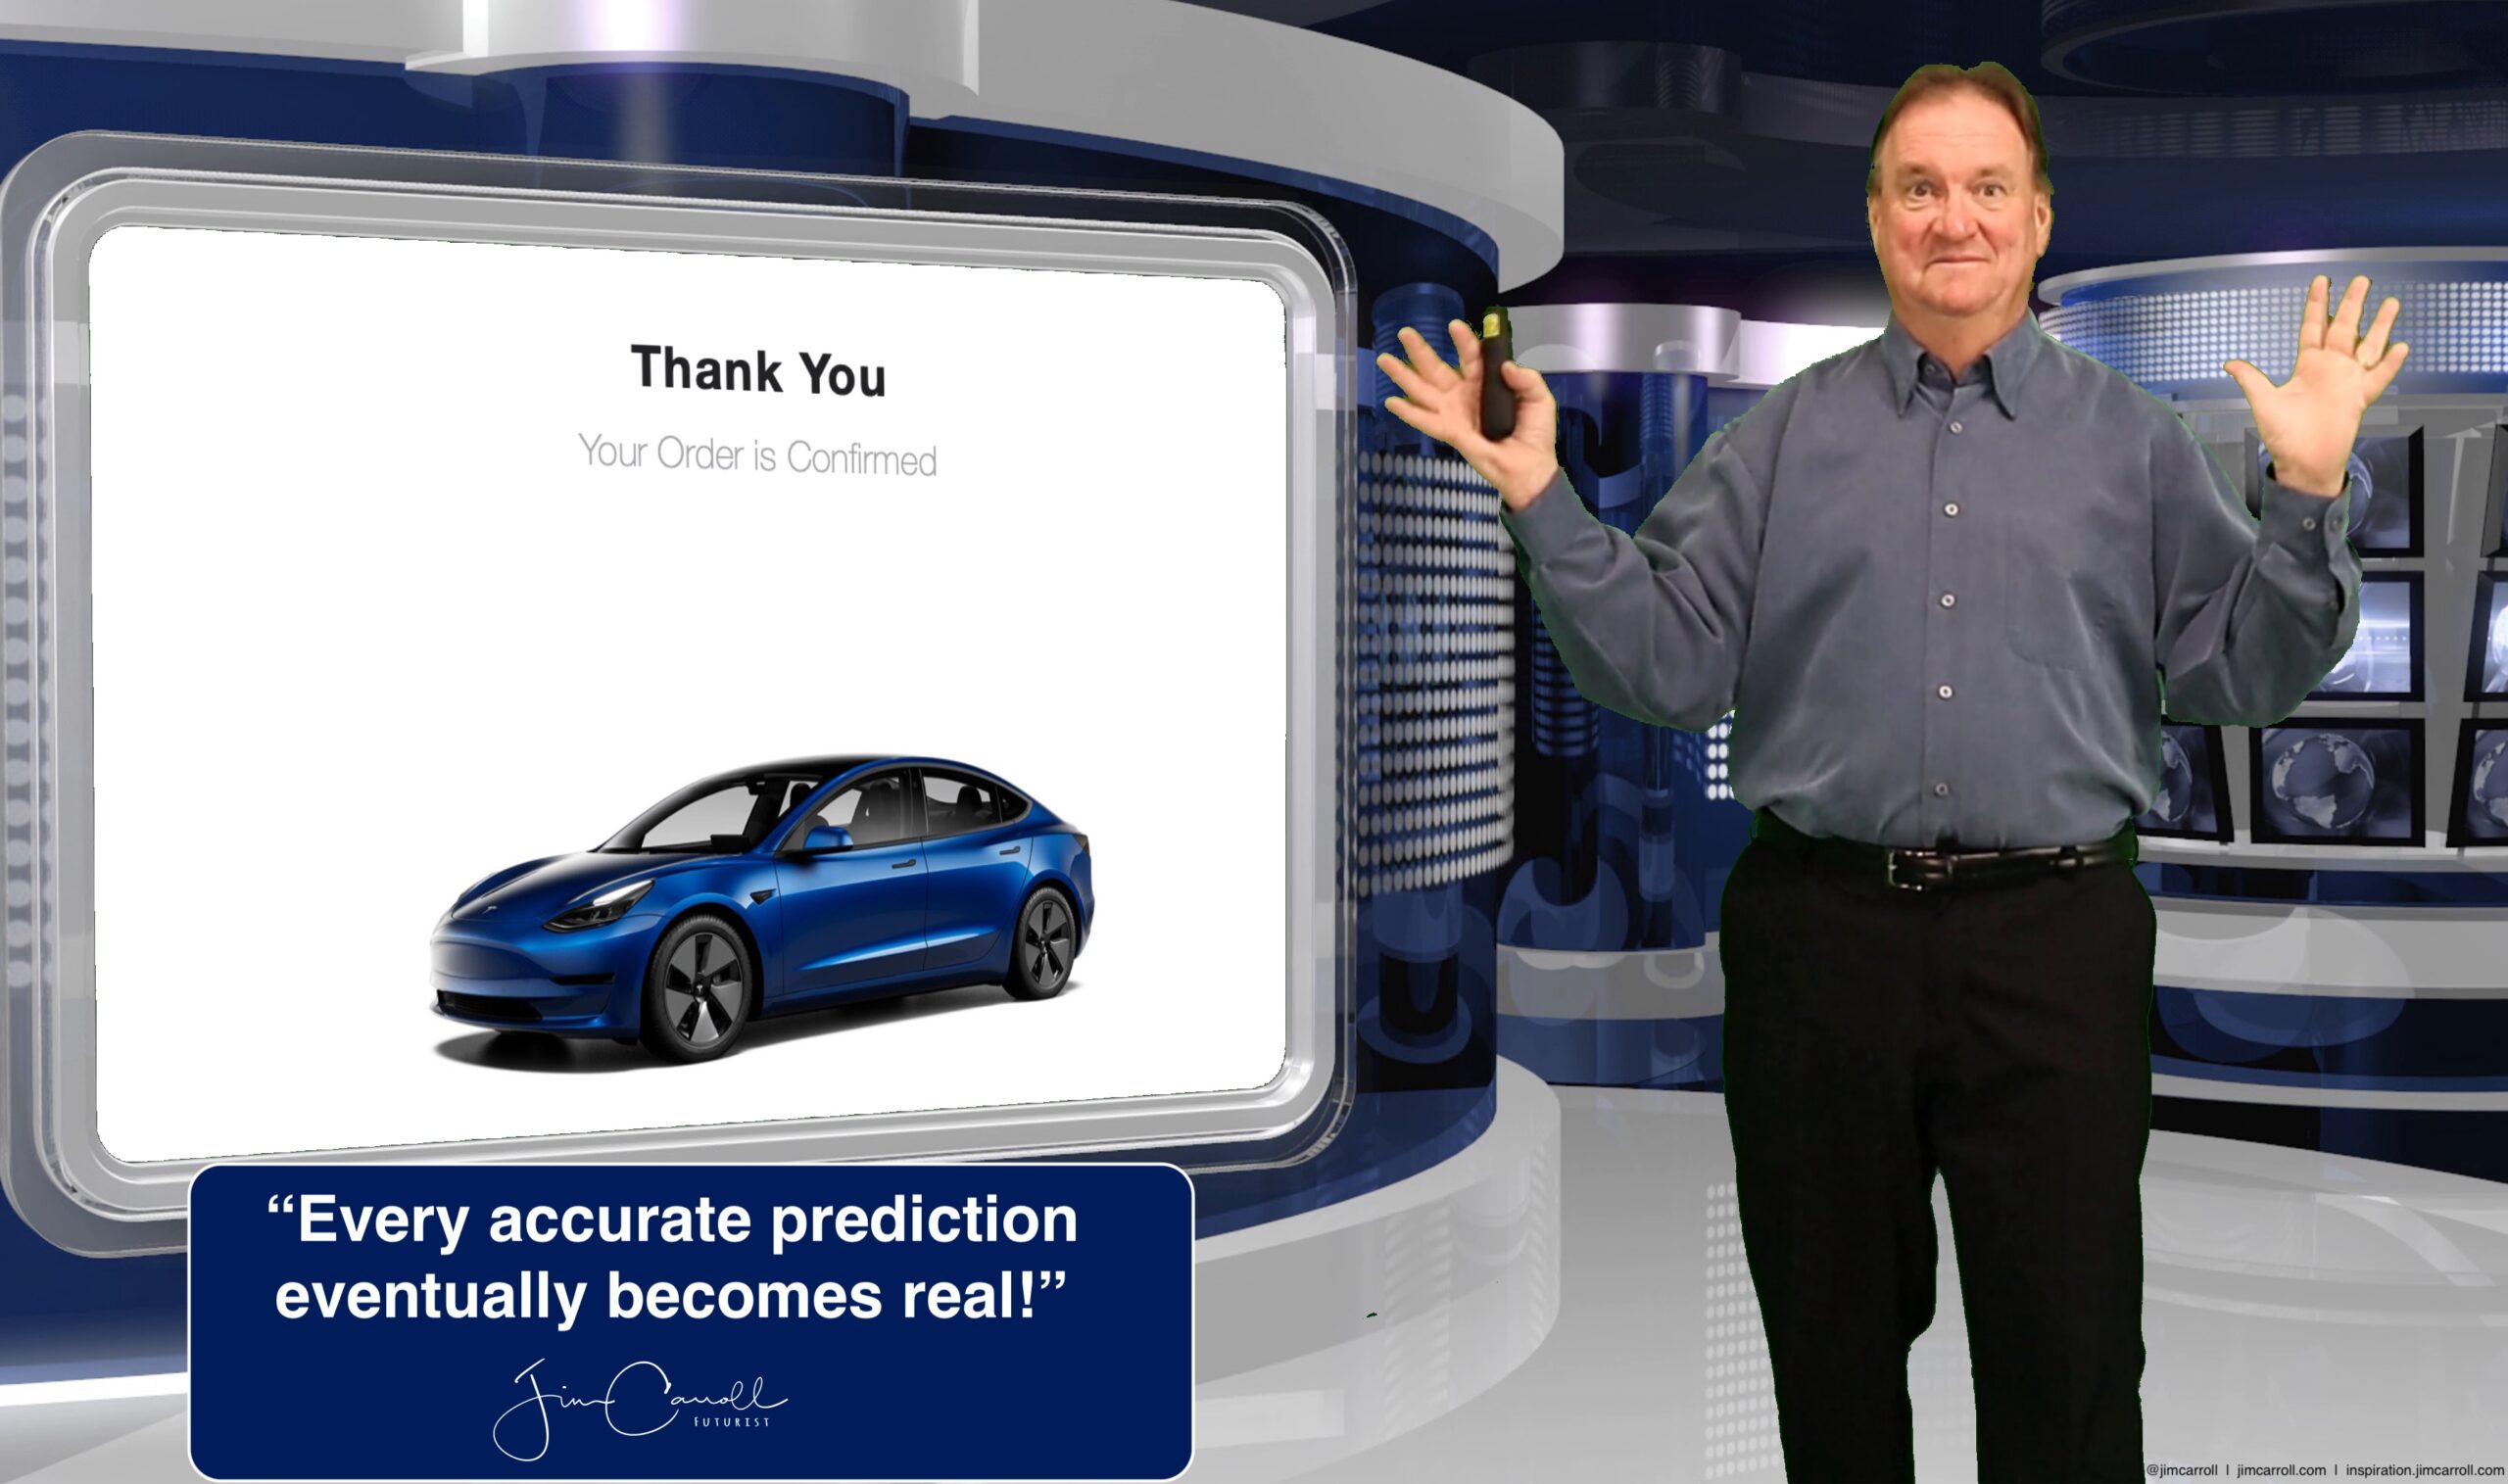 Daily Inspiration: “Every accurate prediction eventually becomes real!”